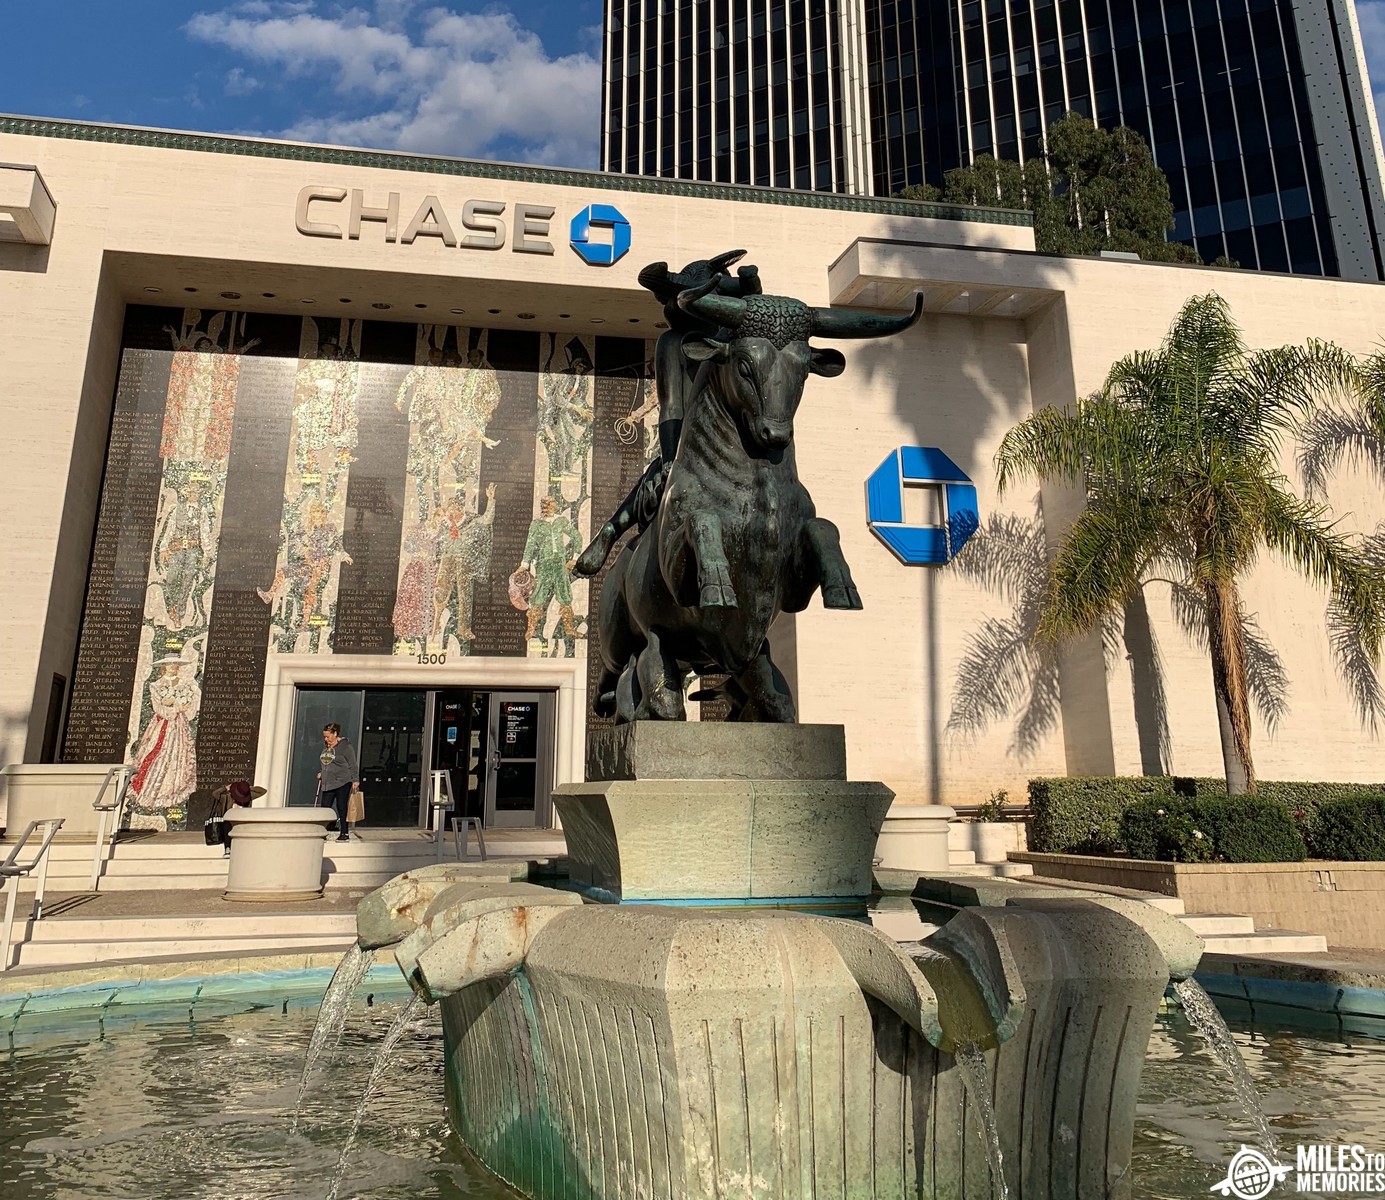 Chase Business Checking Account Sign Up Process